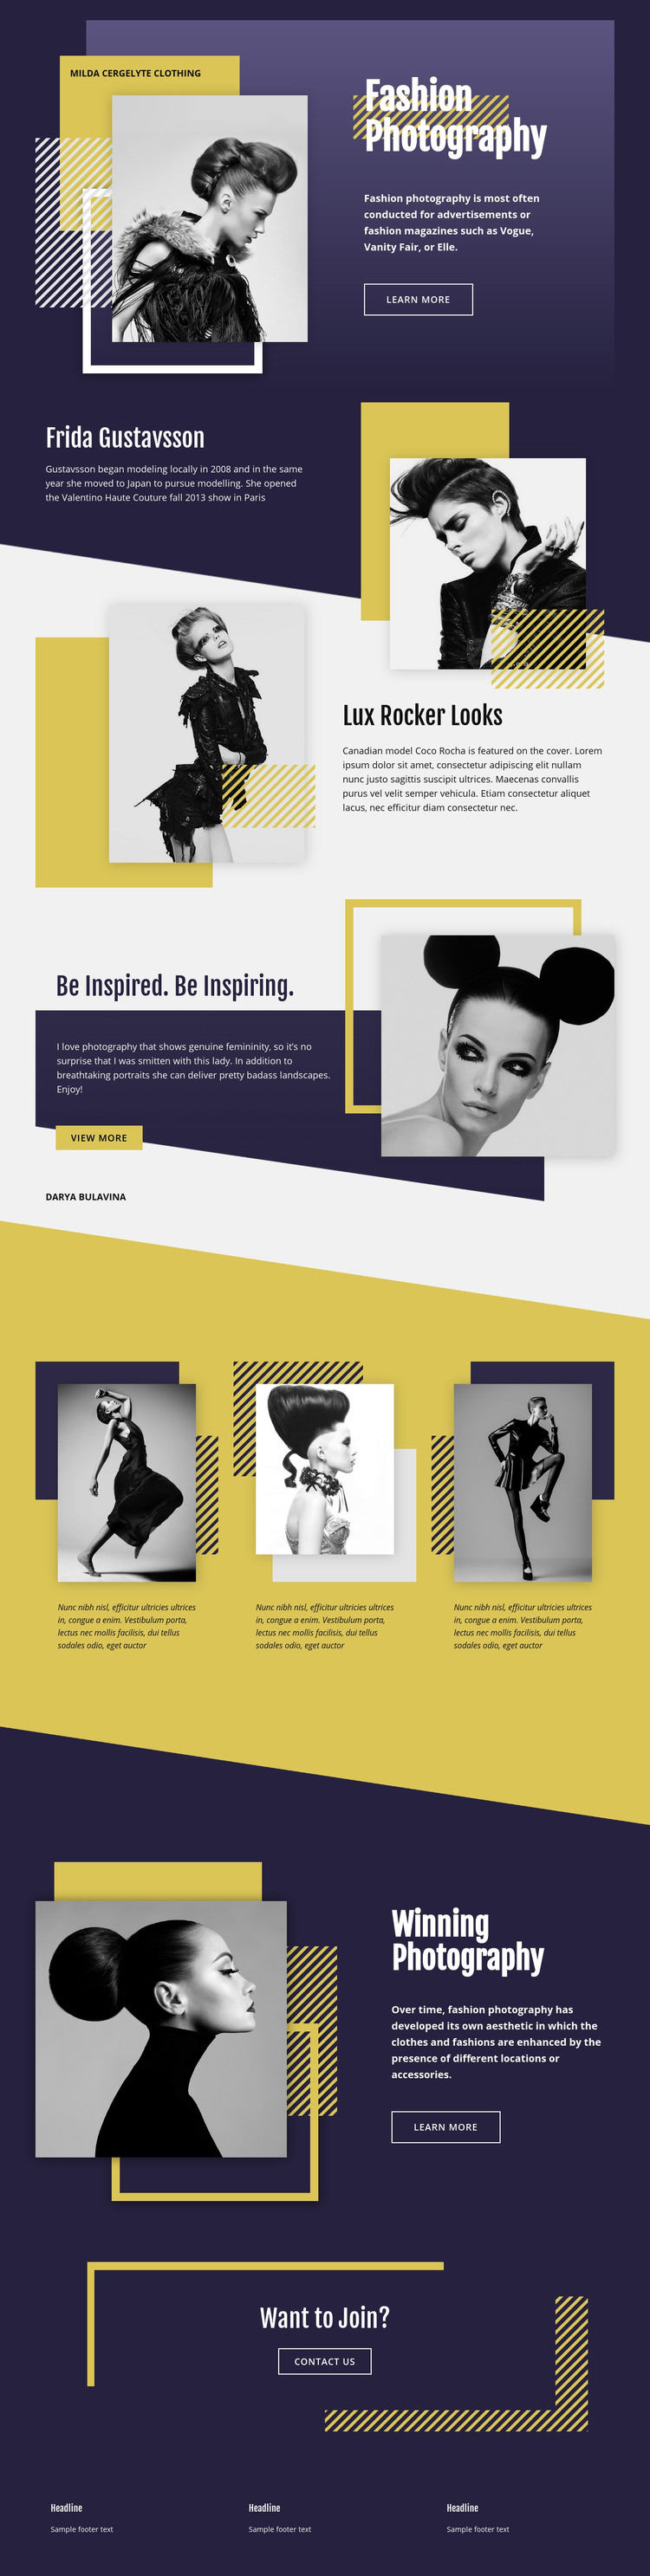 Fashion Photography Overlapping Homepage Design